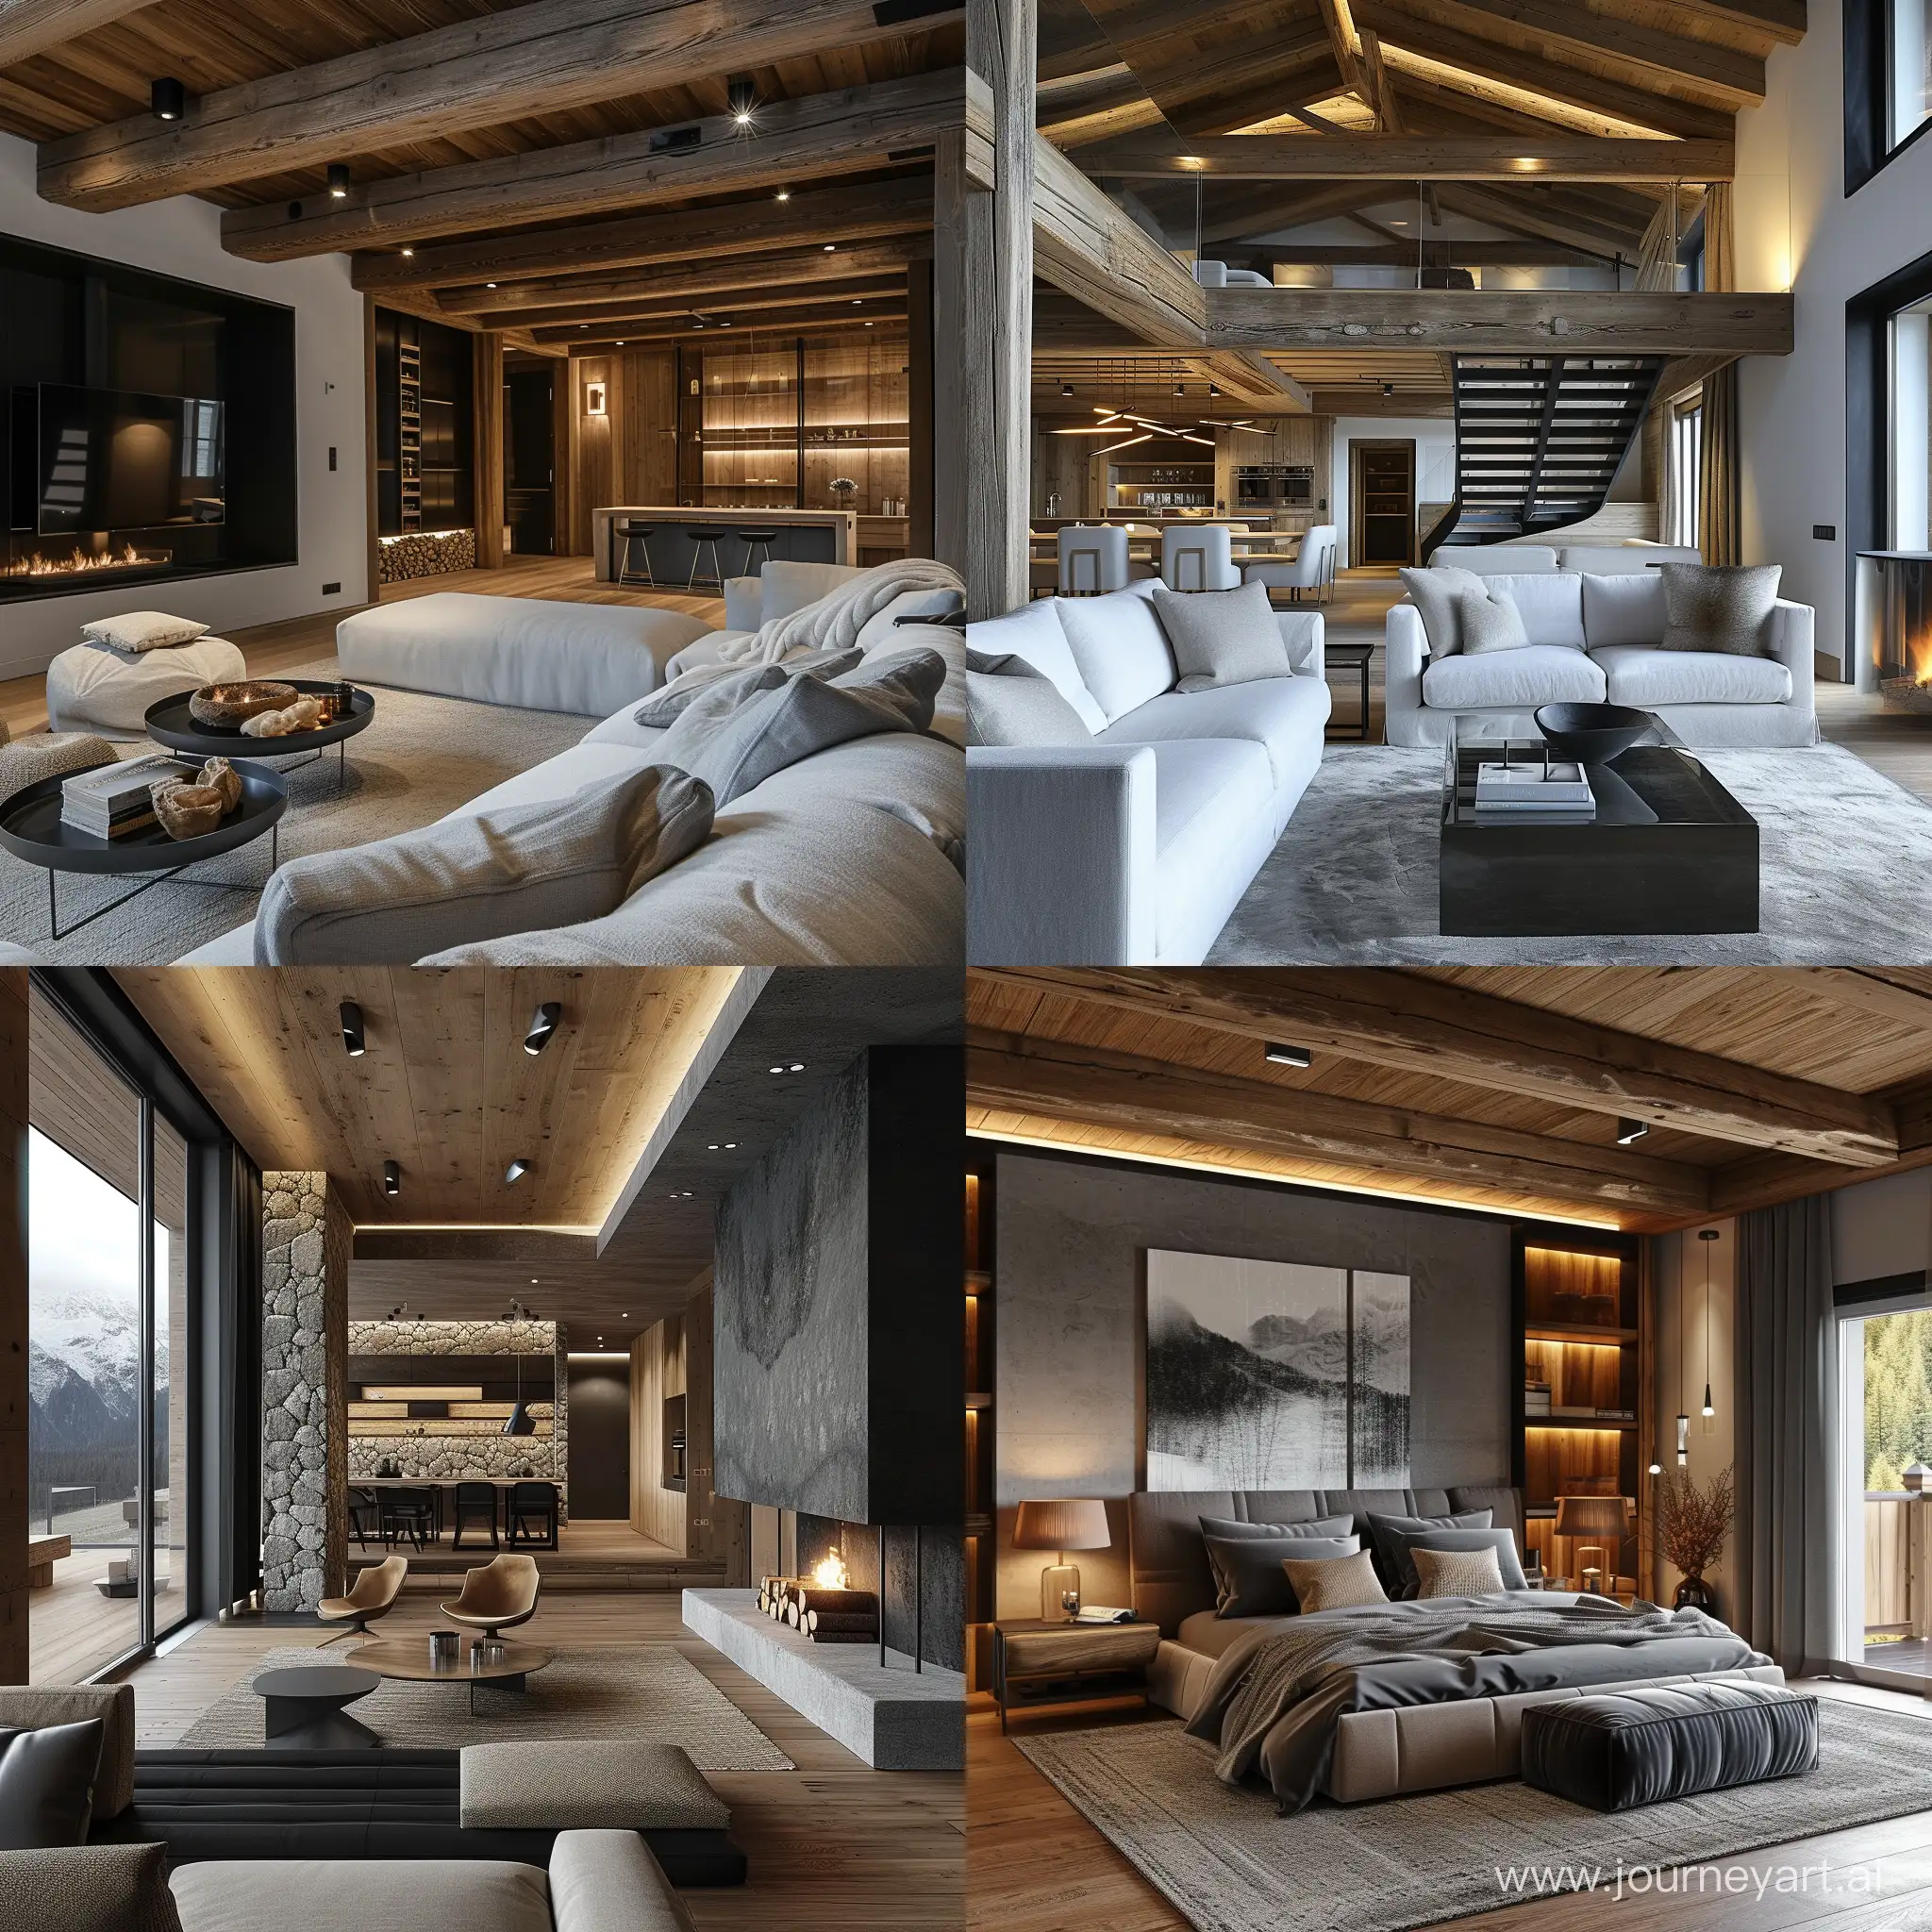 Cozy-Chalet-Style-Interior-with-Modern-Touches